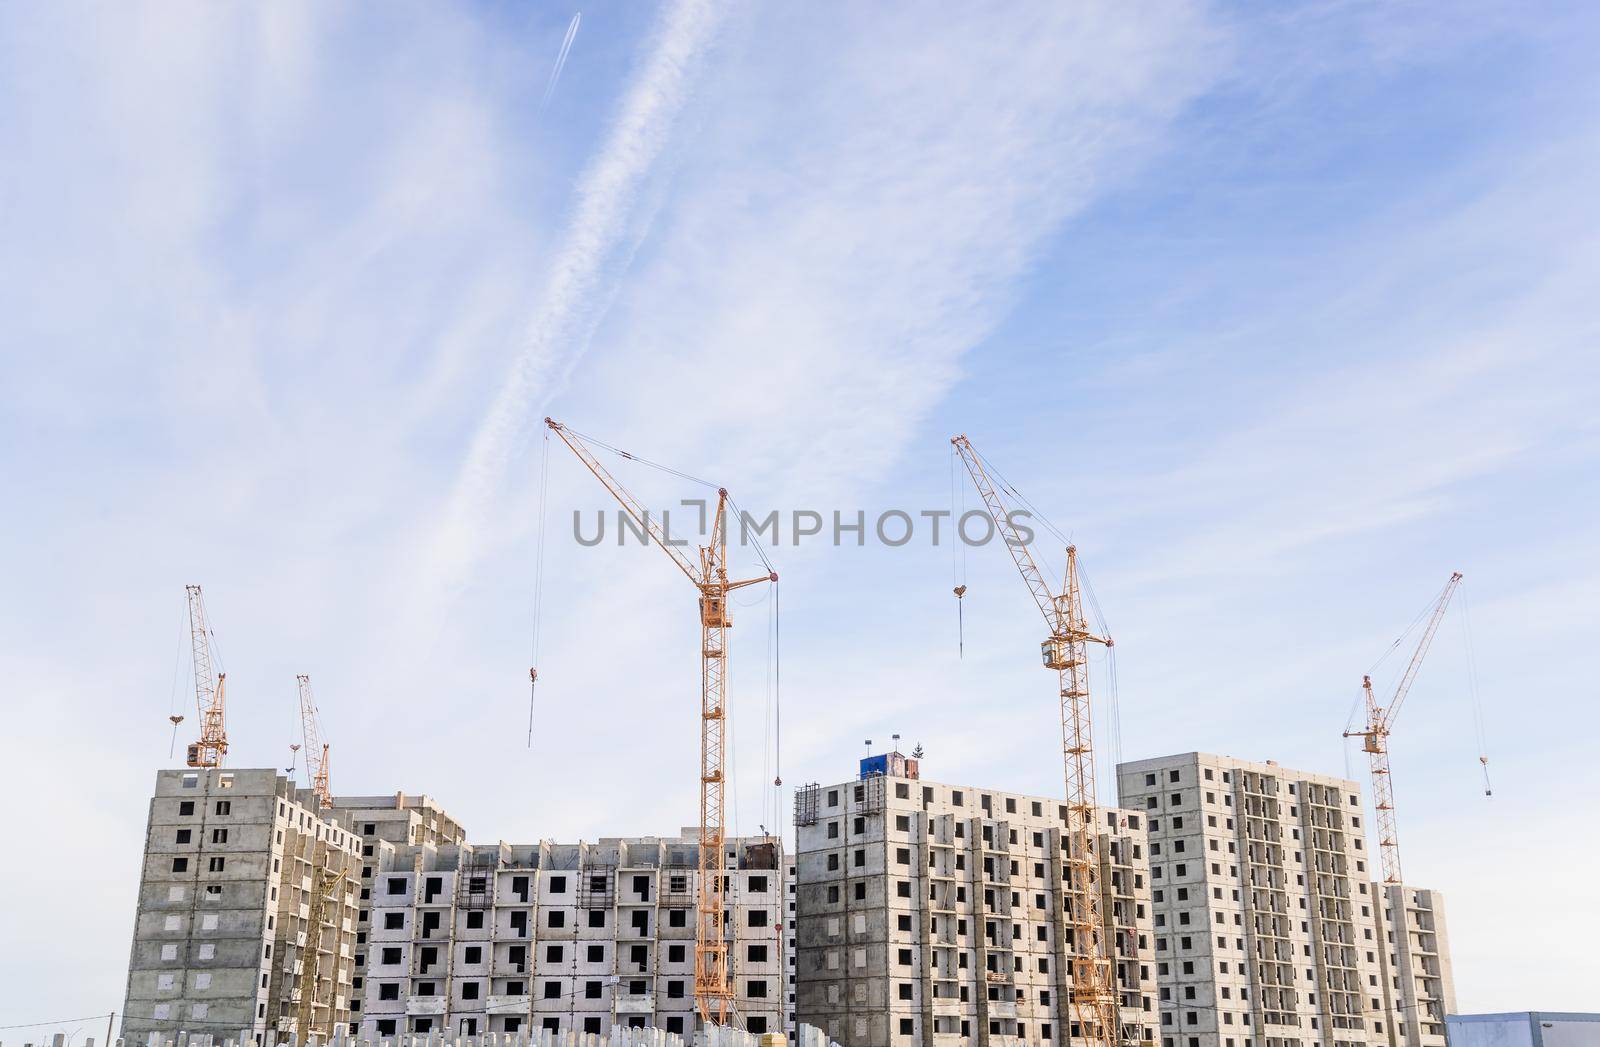 Construction site with cranes on sky background.